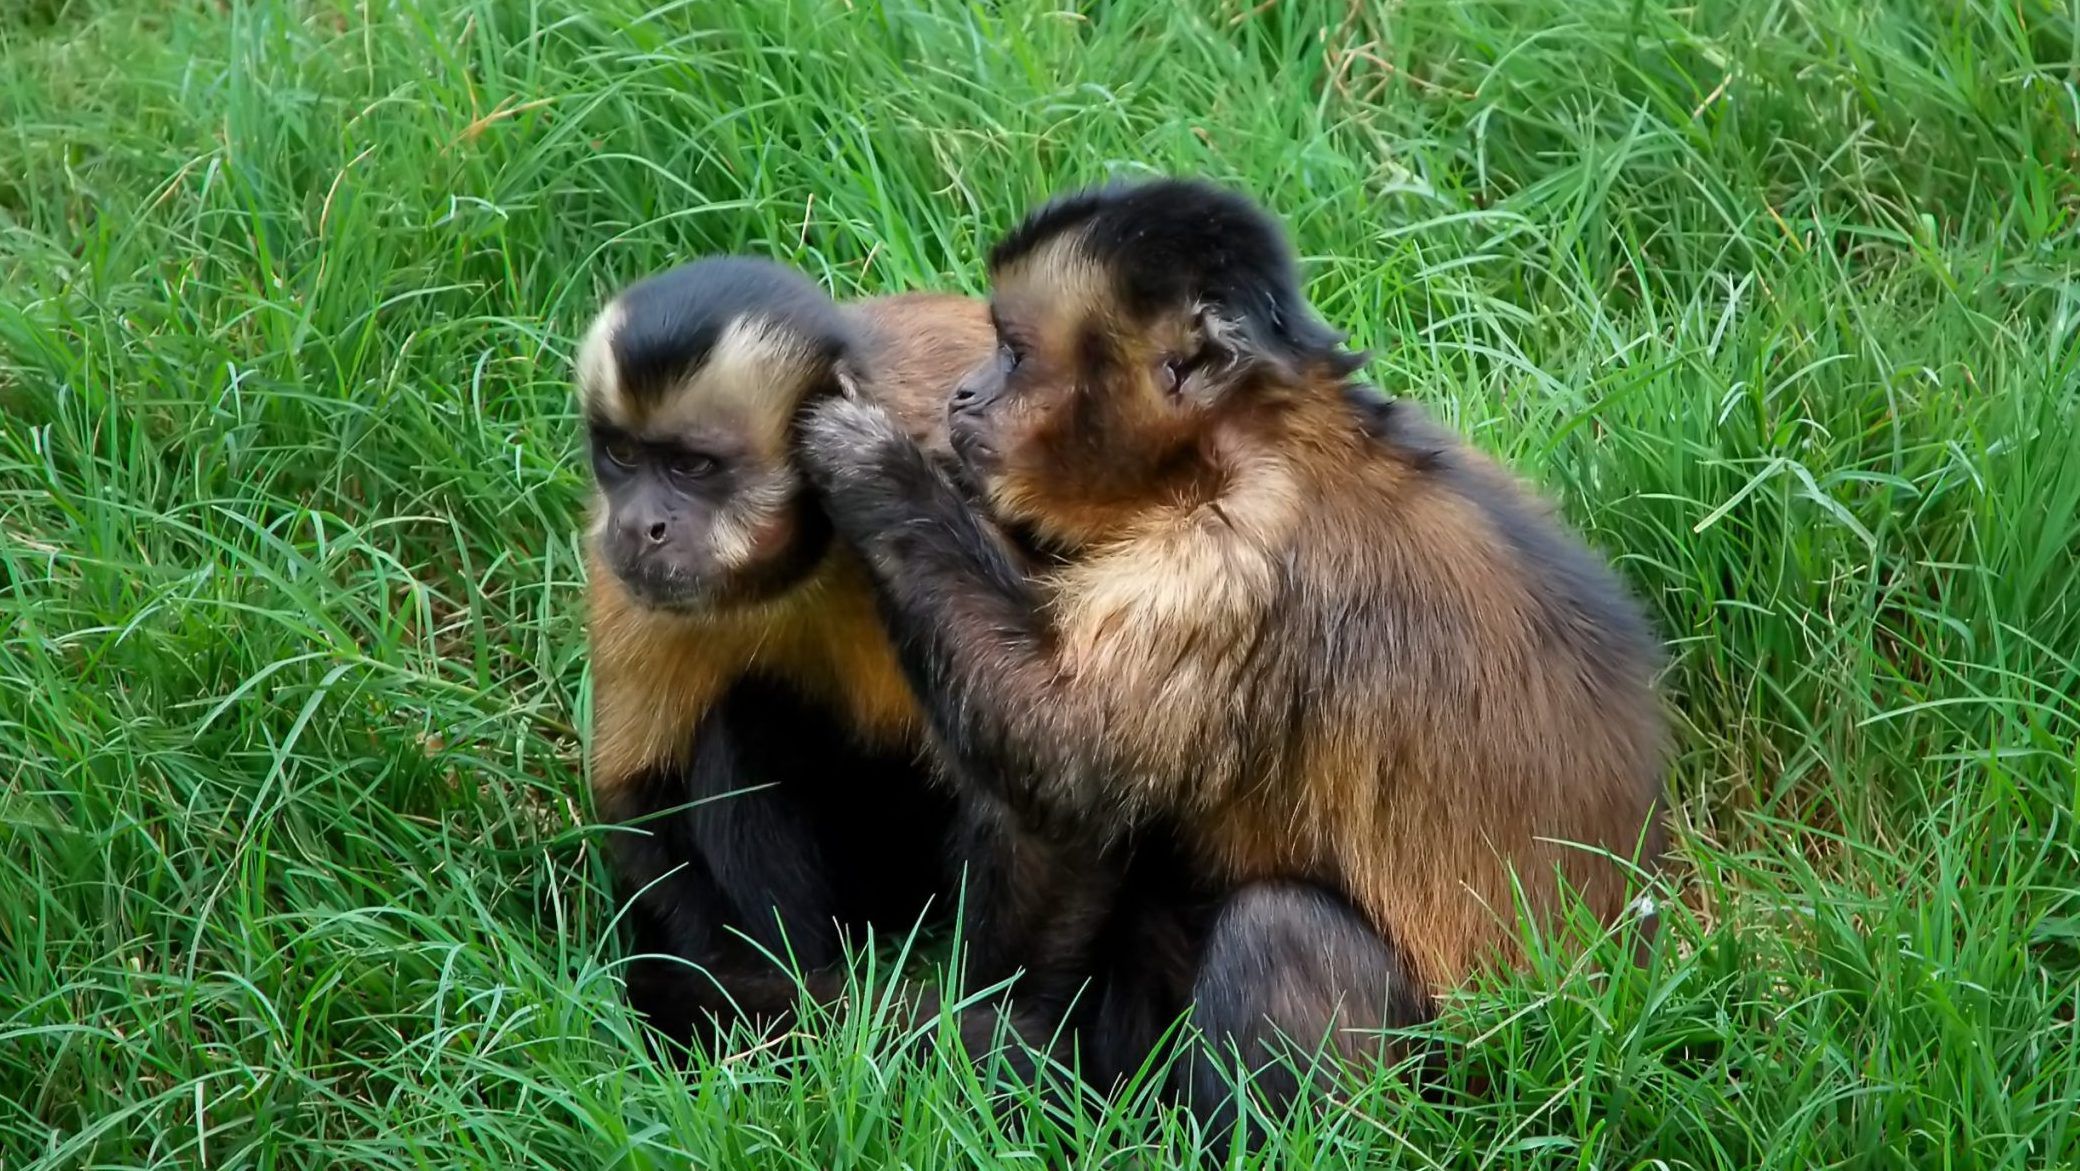 Researchers found that added stress made some monkeys act anxious and flub their tasks. GETTY